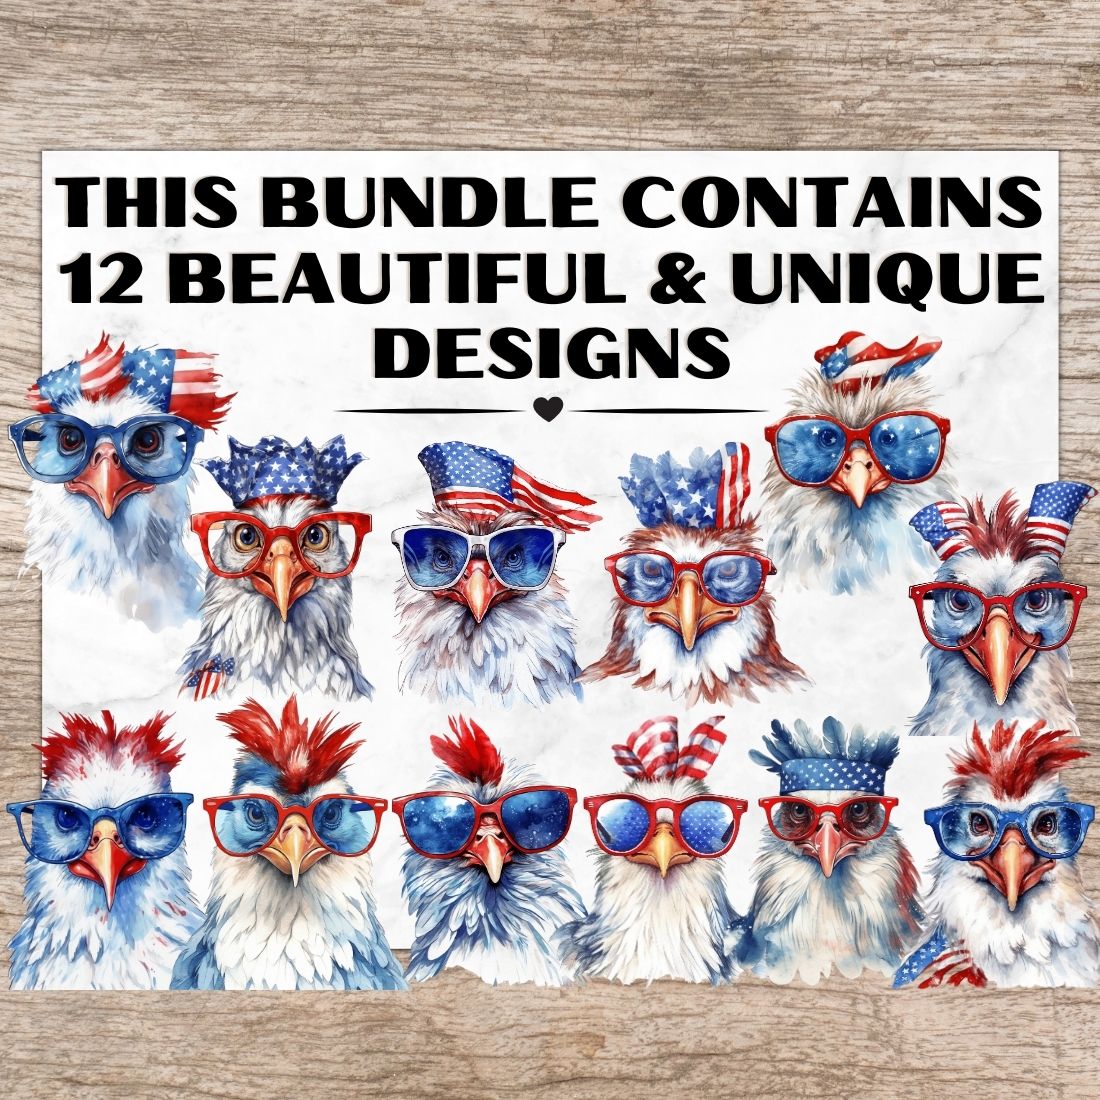 12 American 4th of July Chicken PNG, Watercolor Clipart, Chicken & Rooster with glasses, Transparent PNG, Digital Paper Craft, Illustrations, Watercolor Clipart for Scrapbook, Invitation, Wall Art, T-Shirt Design preview image.